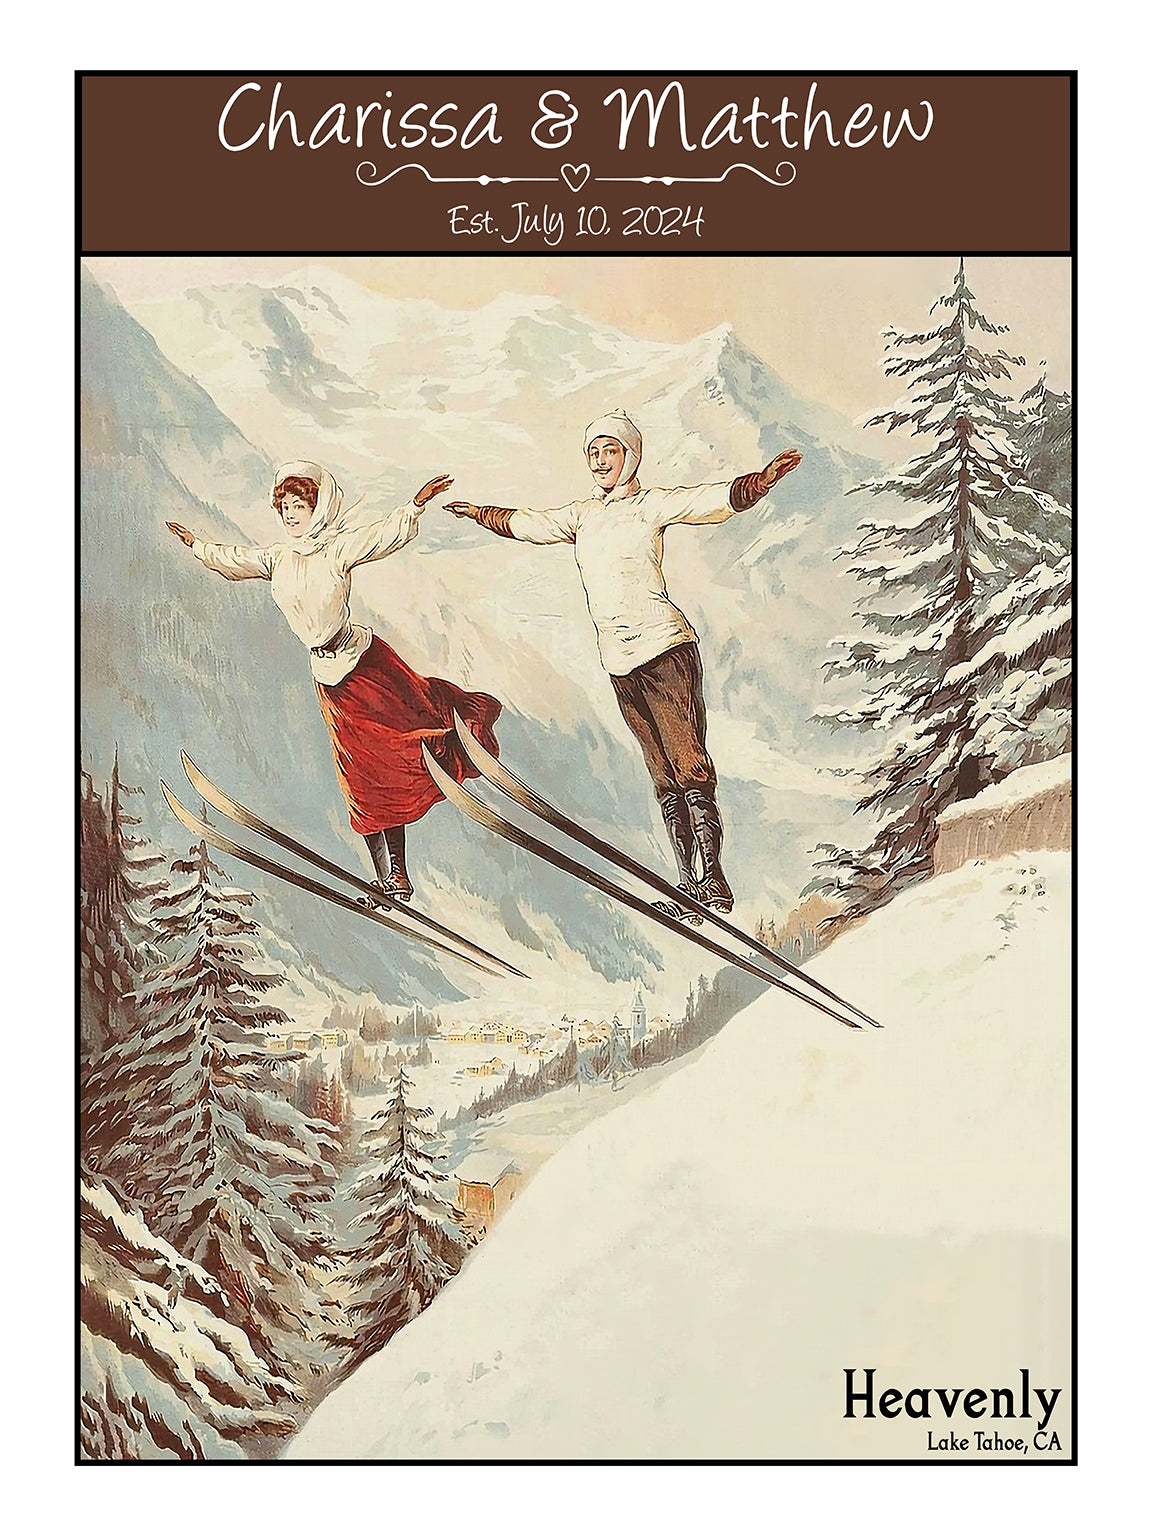 a couple of people riding skis on top of a snow covered slope